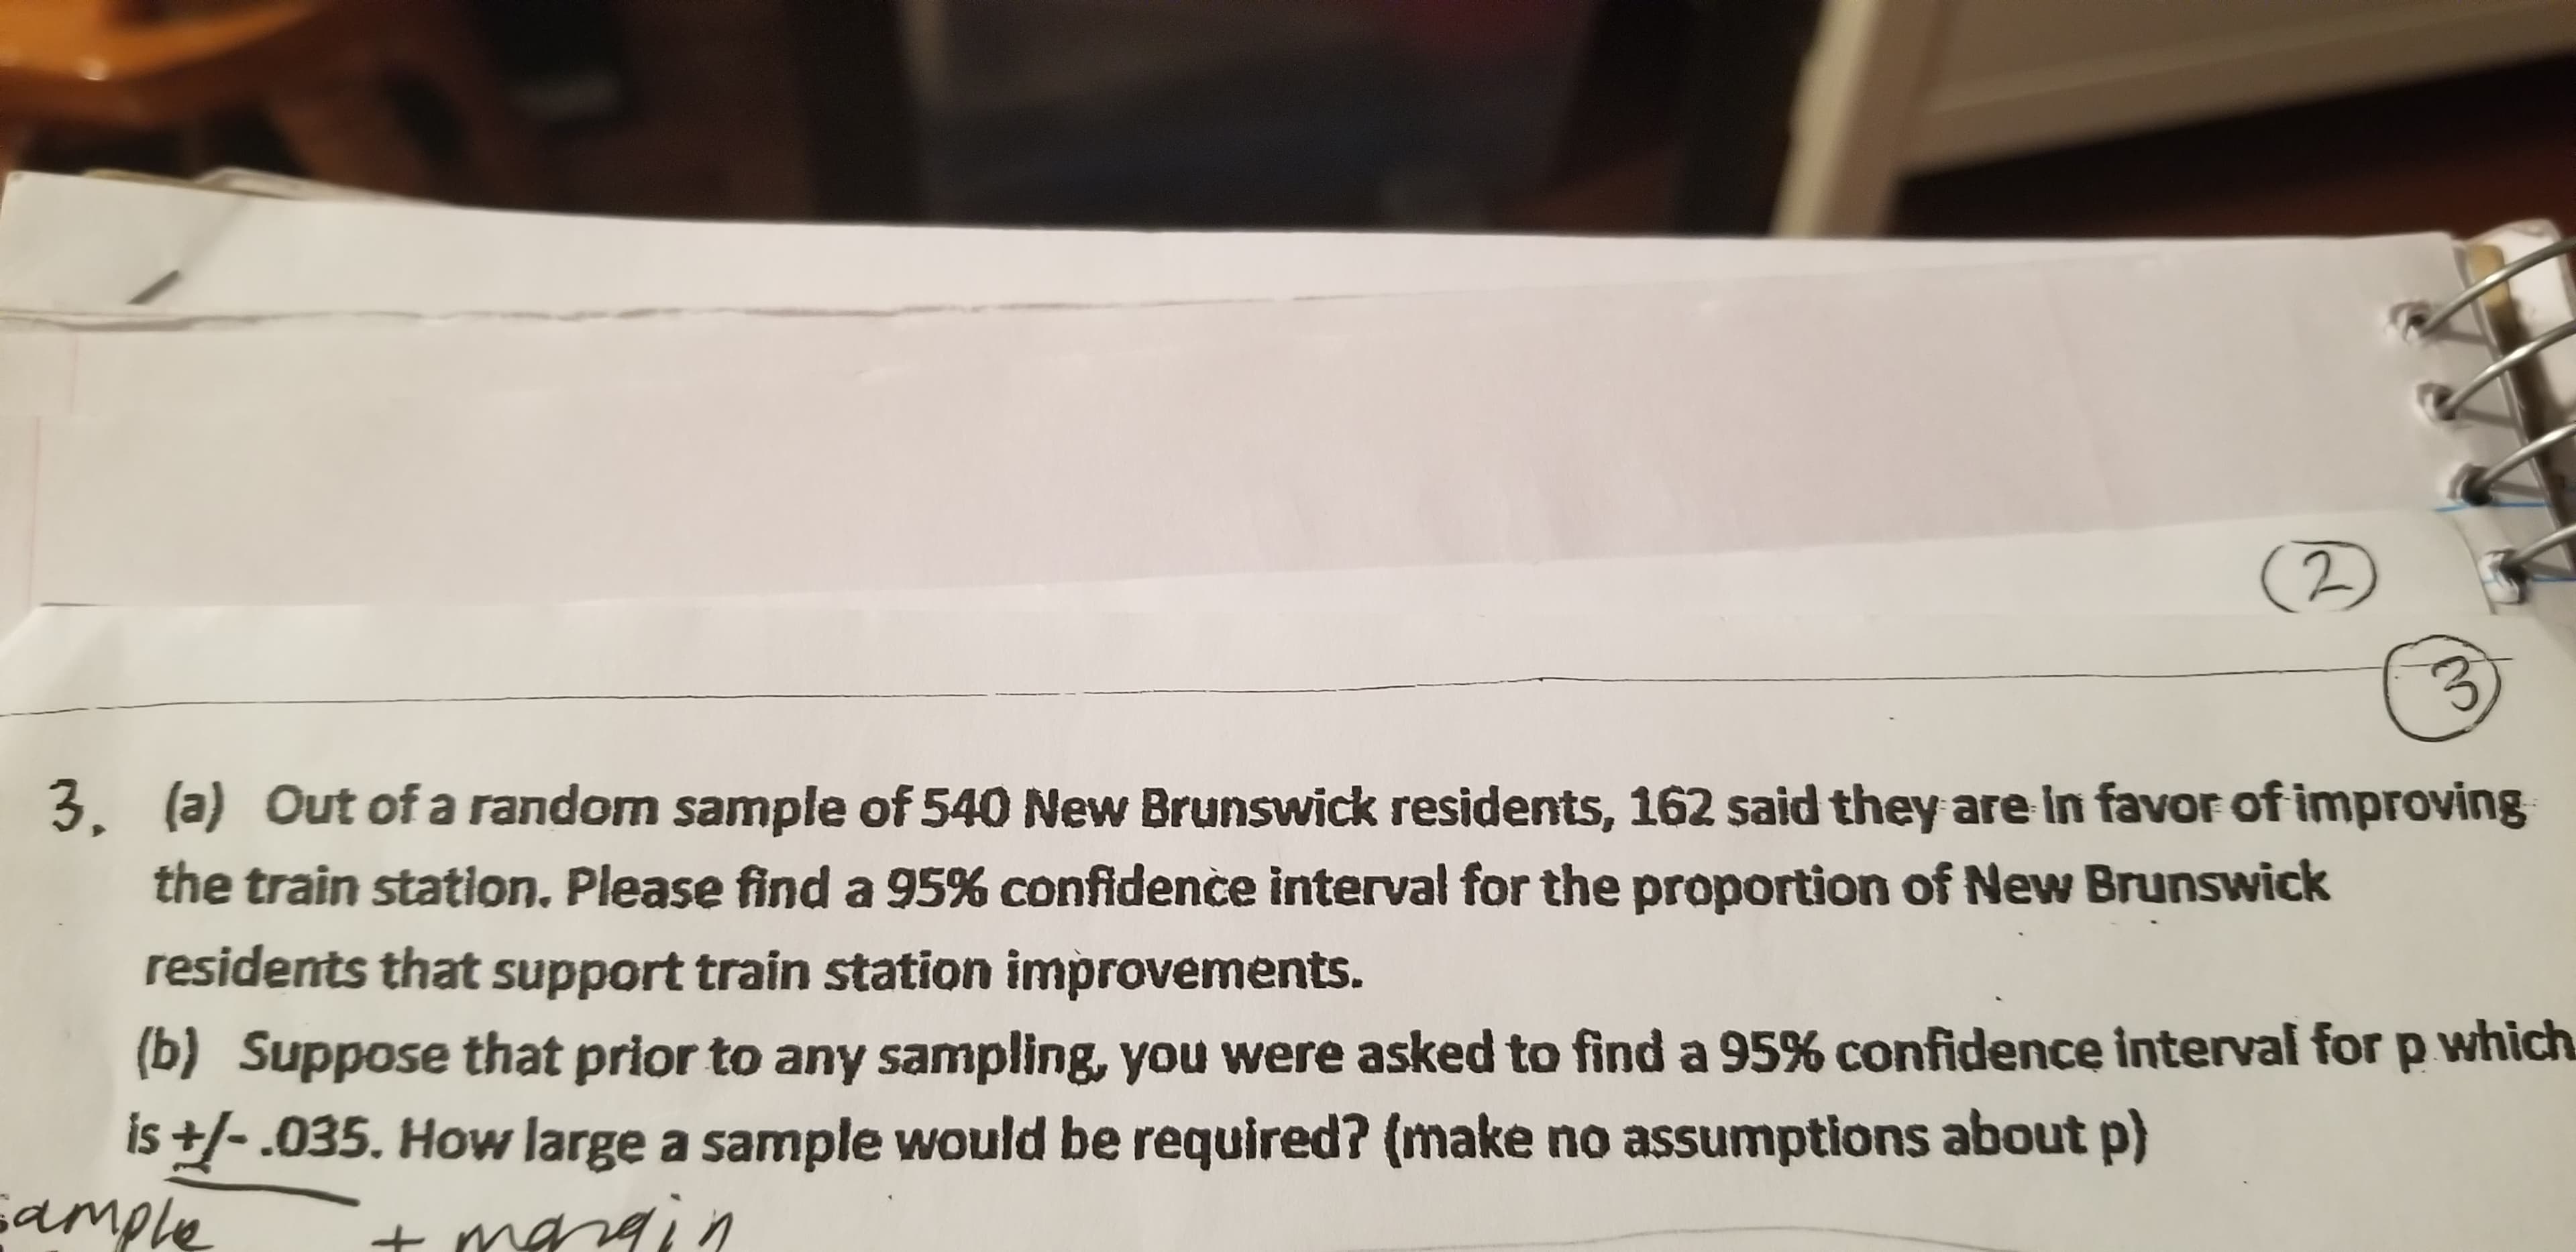 (2)
3.
3. (a) Out of a random sample of 540 New Brunswick residents, 162 said they are in favor of improving
the train station. Please find a 95% confidence interval for the proportion of New Brunswick
residents that support train station improvements.
(b) Suppose that prior to any sampling, you were asked to find a 95% confidence interval for p which
is ±/- .035. How large a sample would be required? (make no assumptions about p)
sample
t margin
